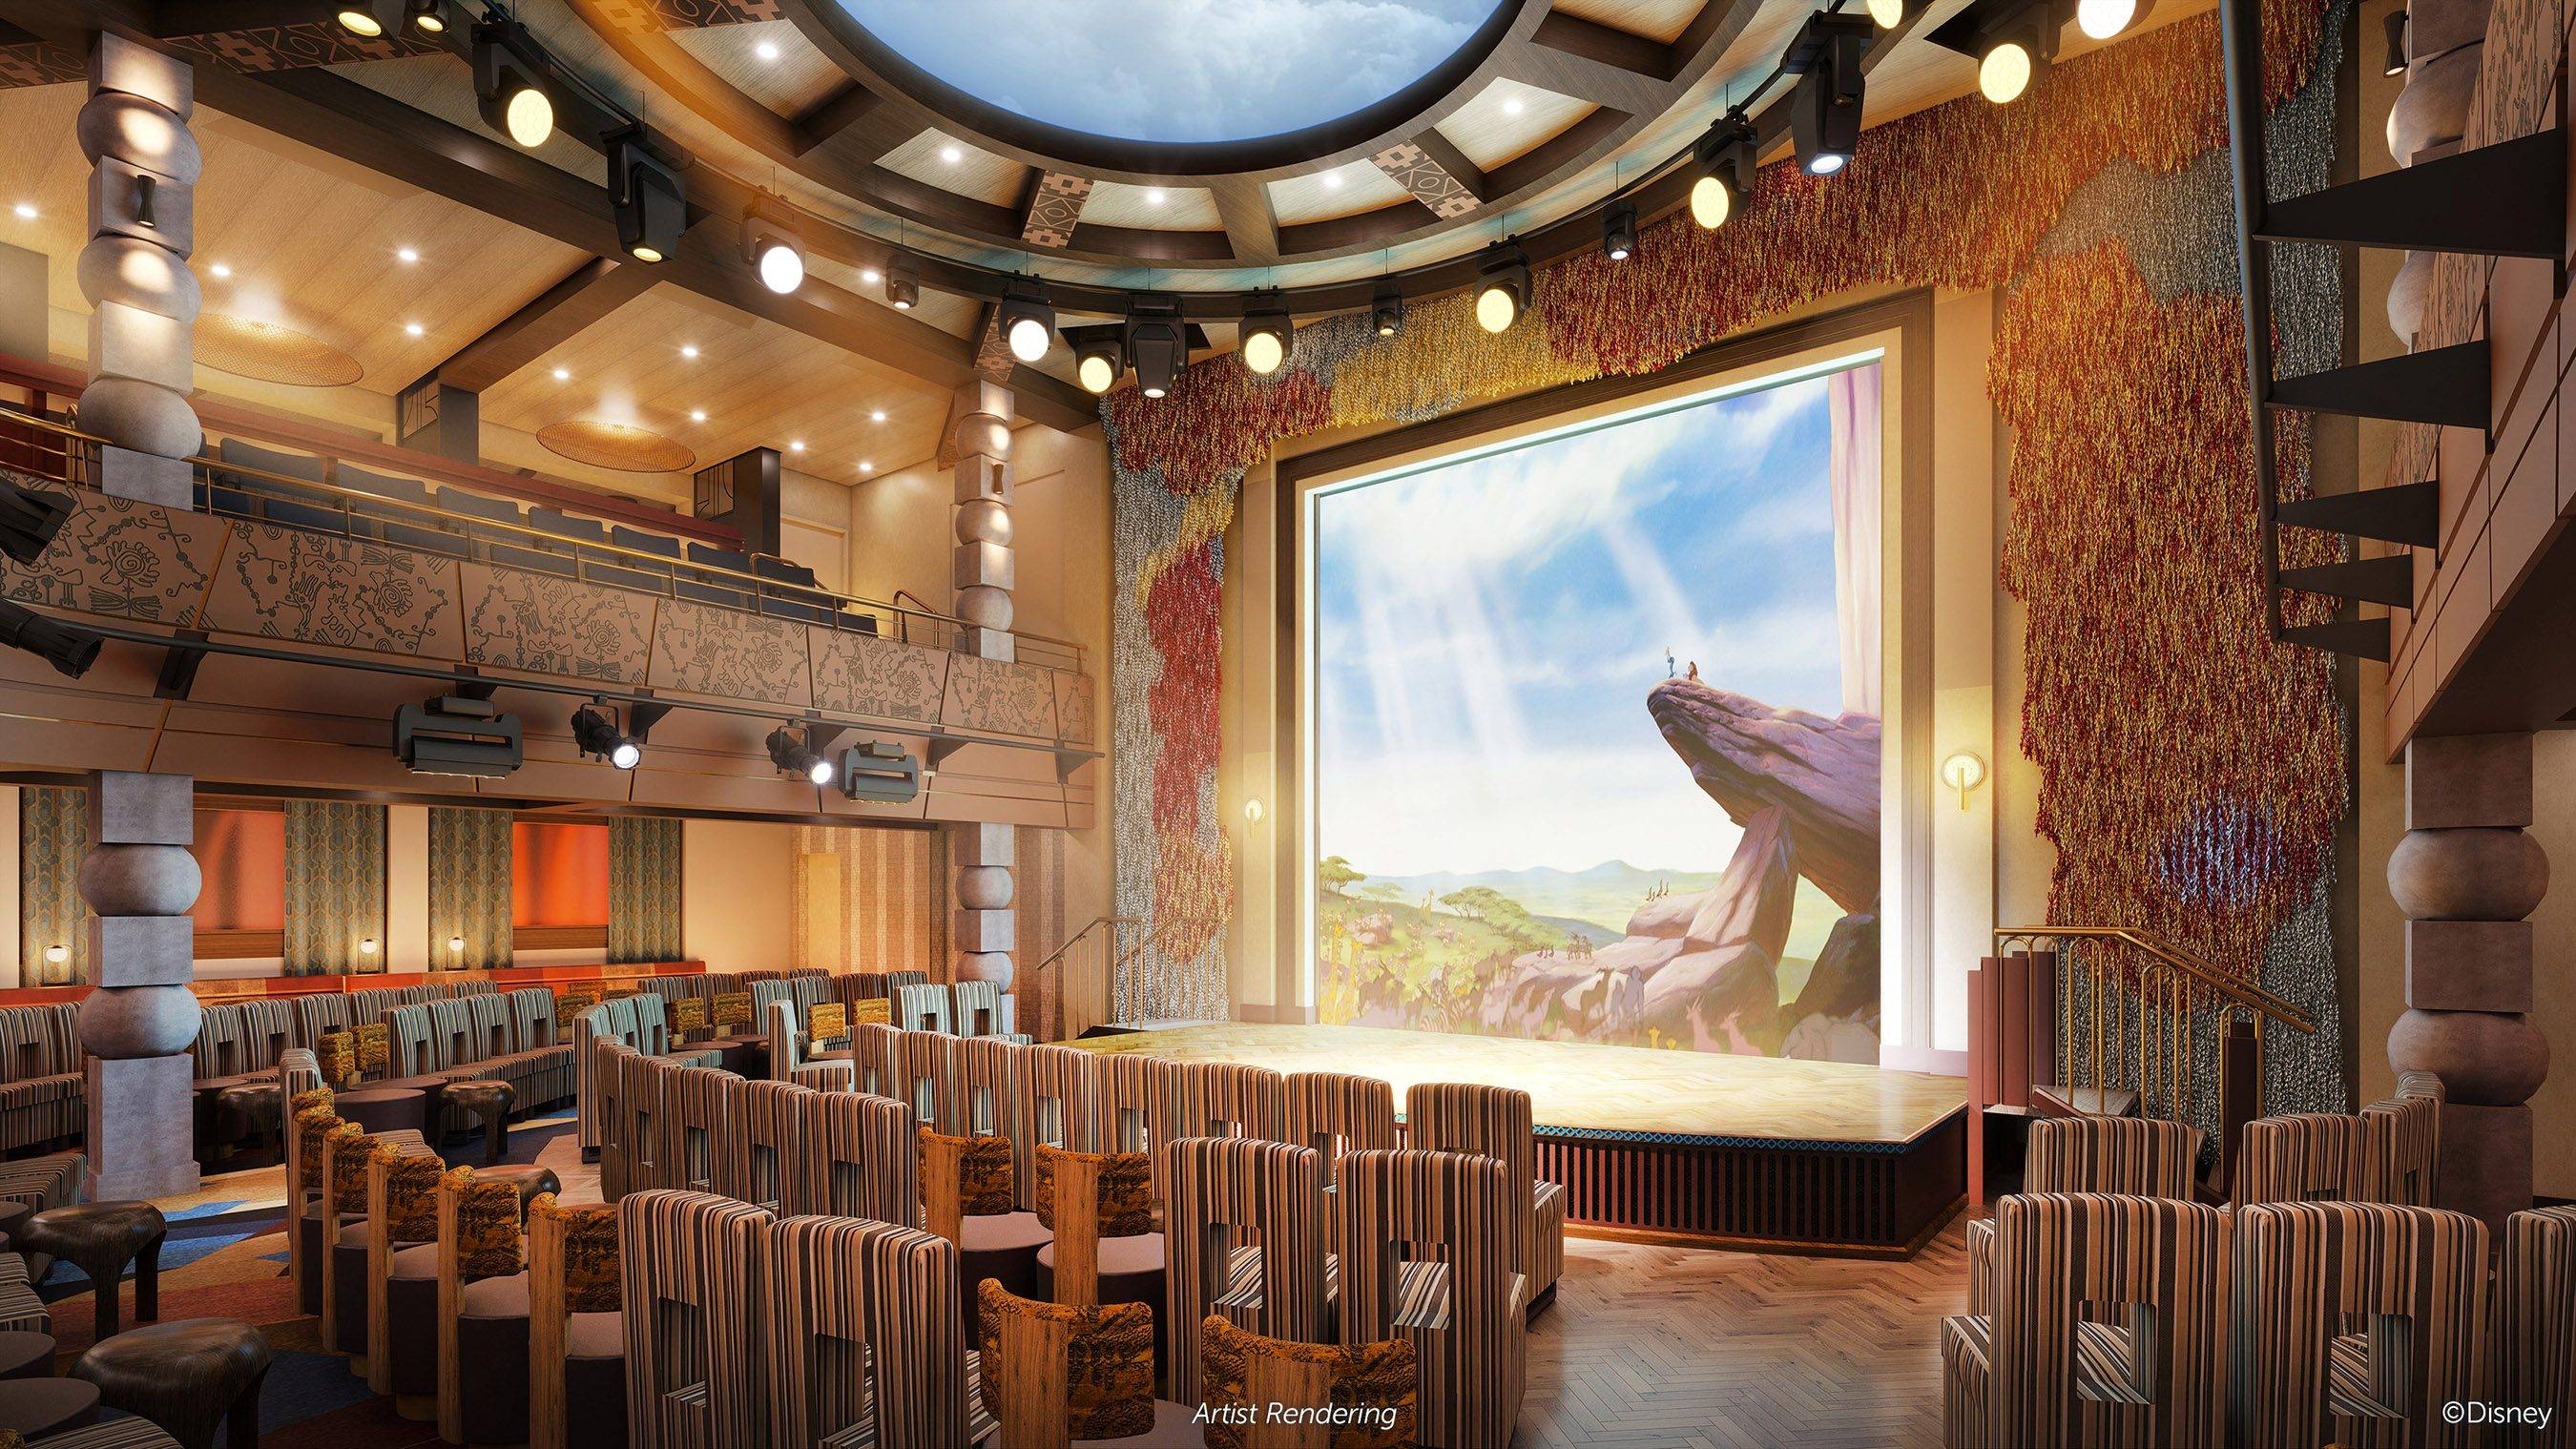 Named for the lioness matriarch from Disney’s “The Lion King,” Sarabi will be a central hub for a multitude of daytime activities and adult-exclusive evening entertainment onboard Disney Cruise Line’s newest ship, the Disney Treasure, serving as the perfect gathering place for families.